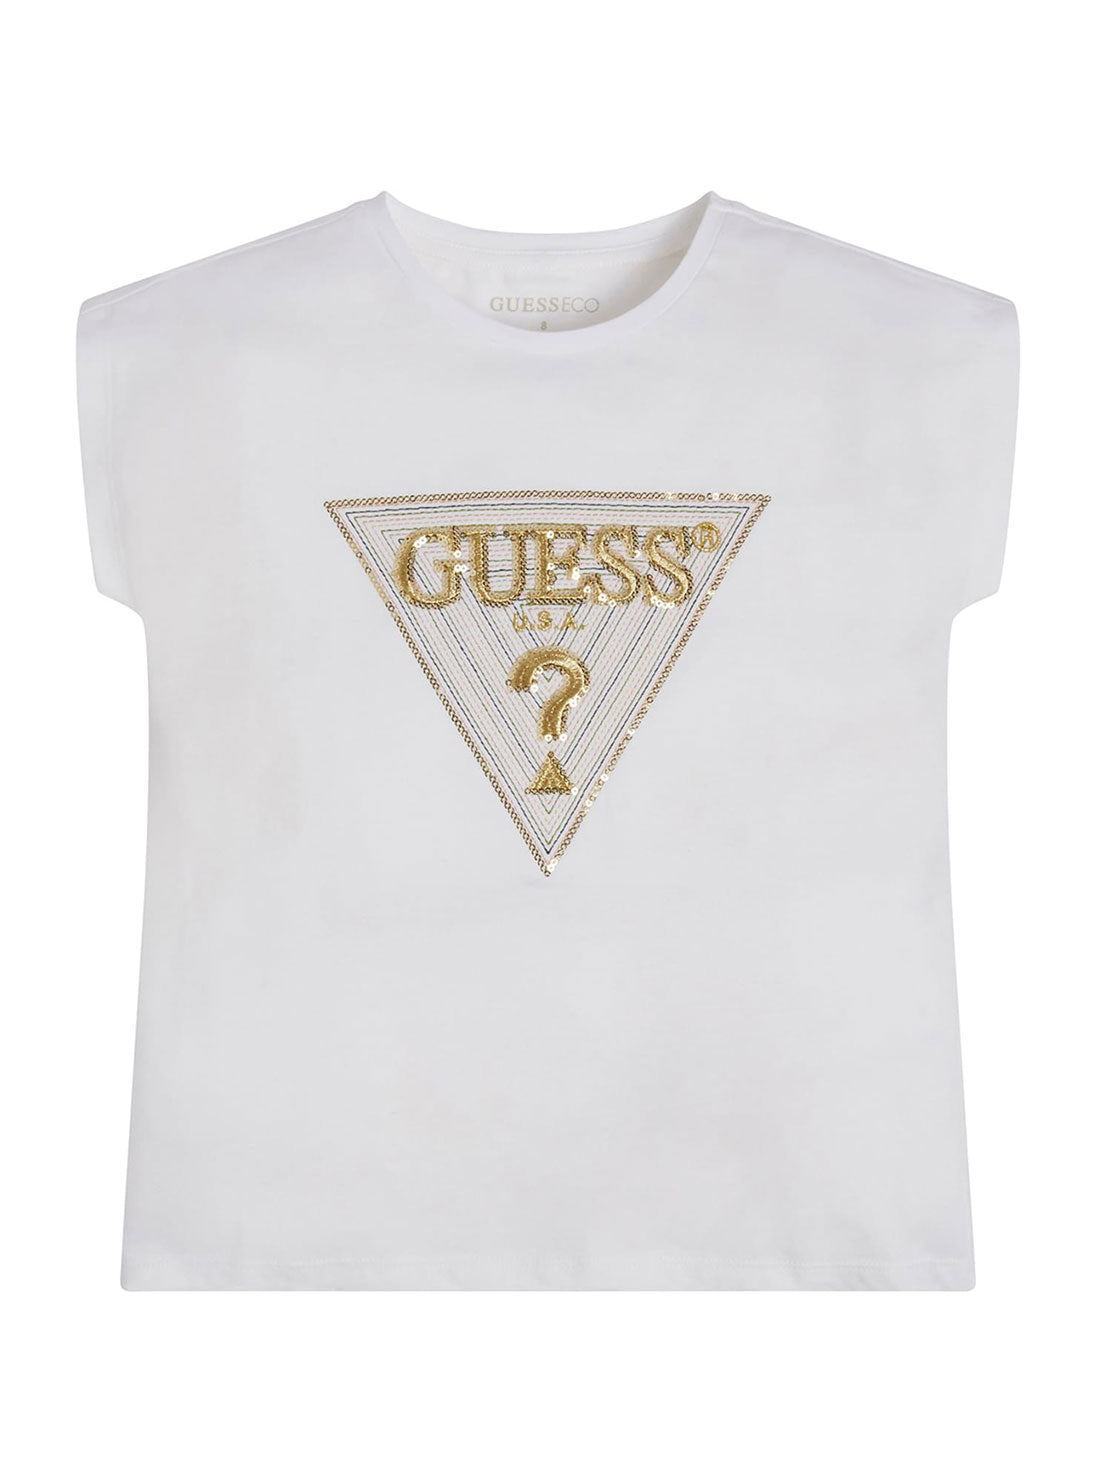 Eco Sequin Triangle Logo Girl's White T-Shirt (7-16) front view